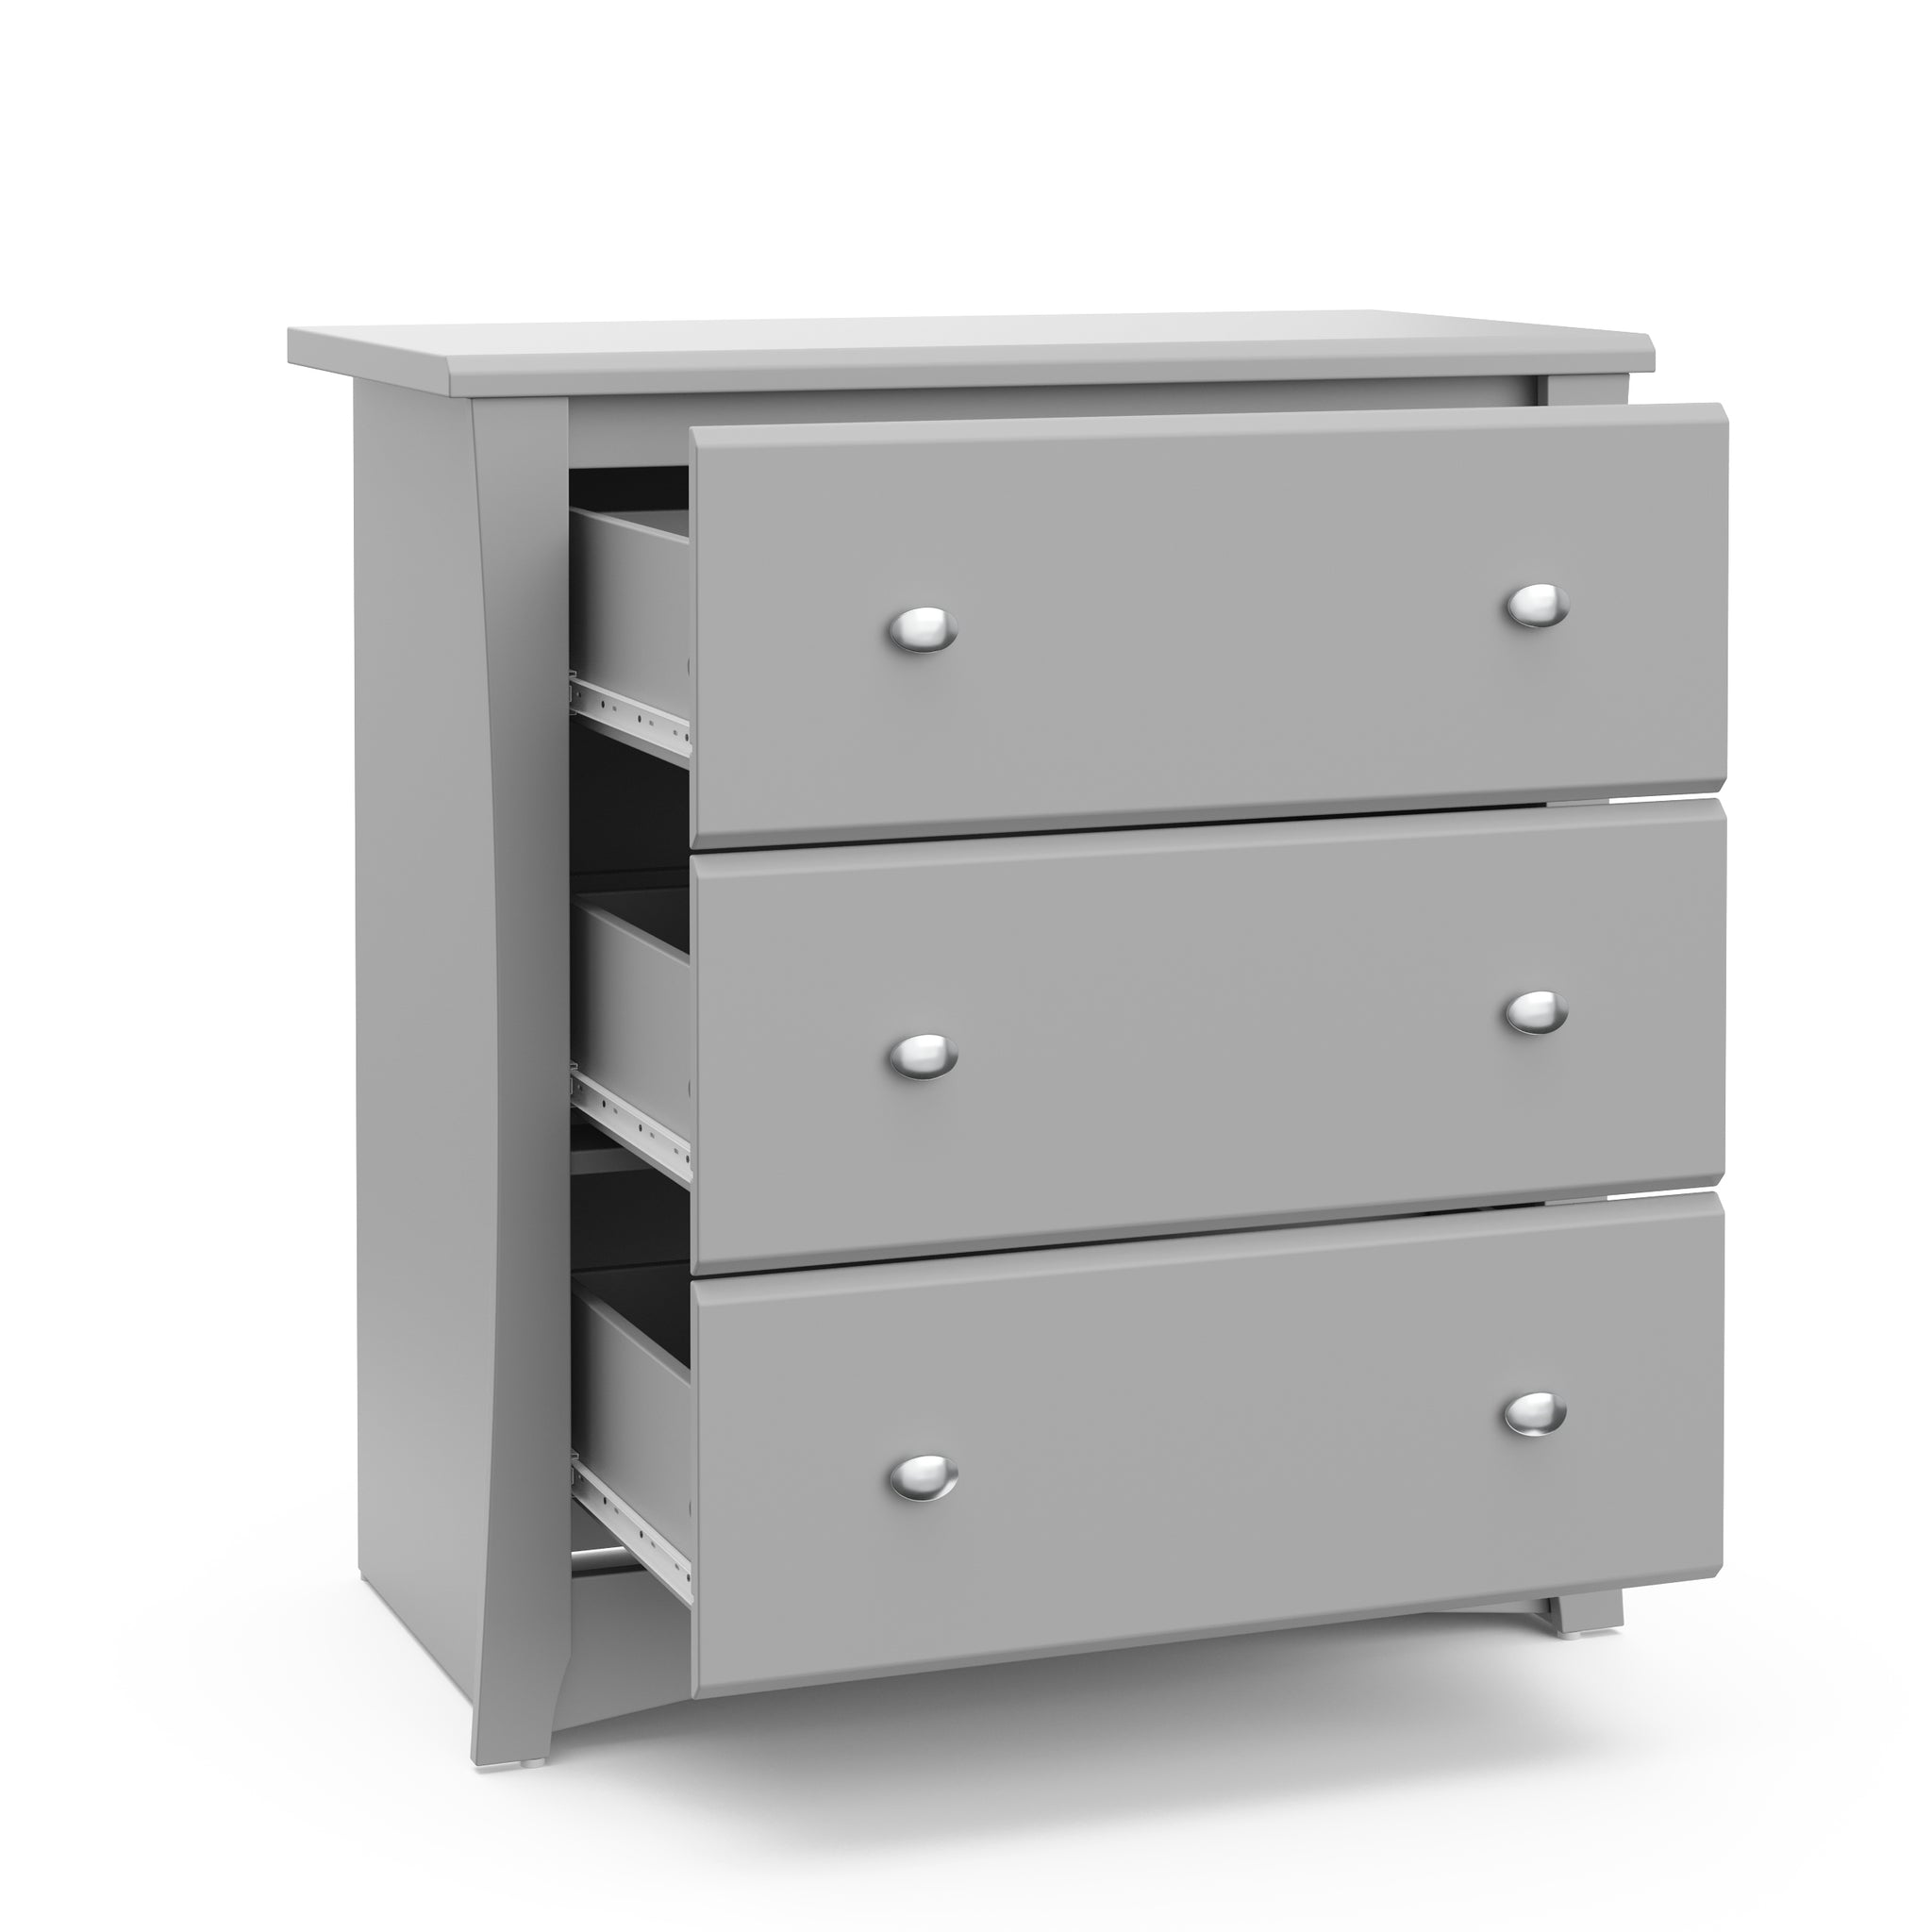 Pebble gray 3 drawer chest with open drawer